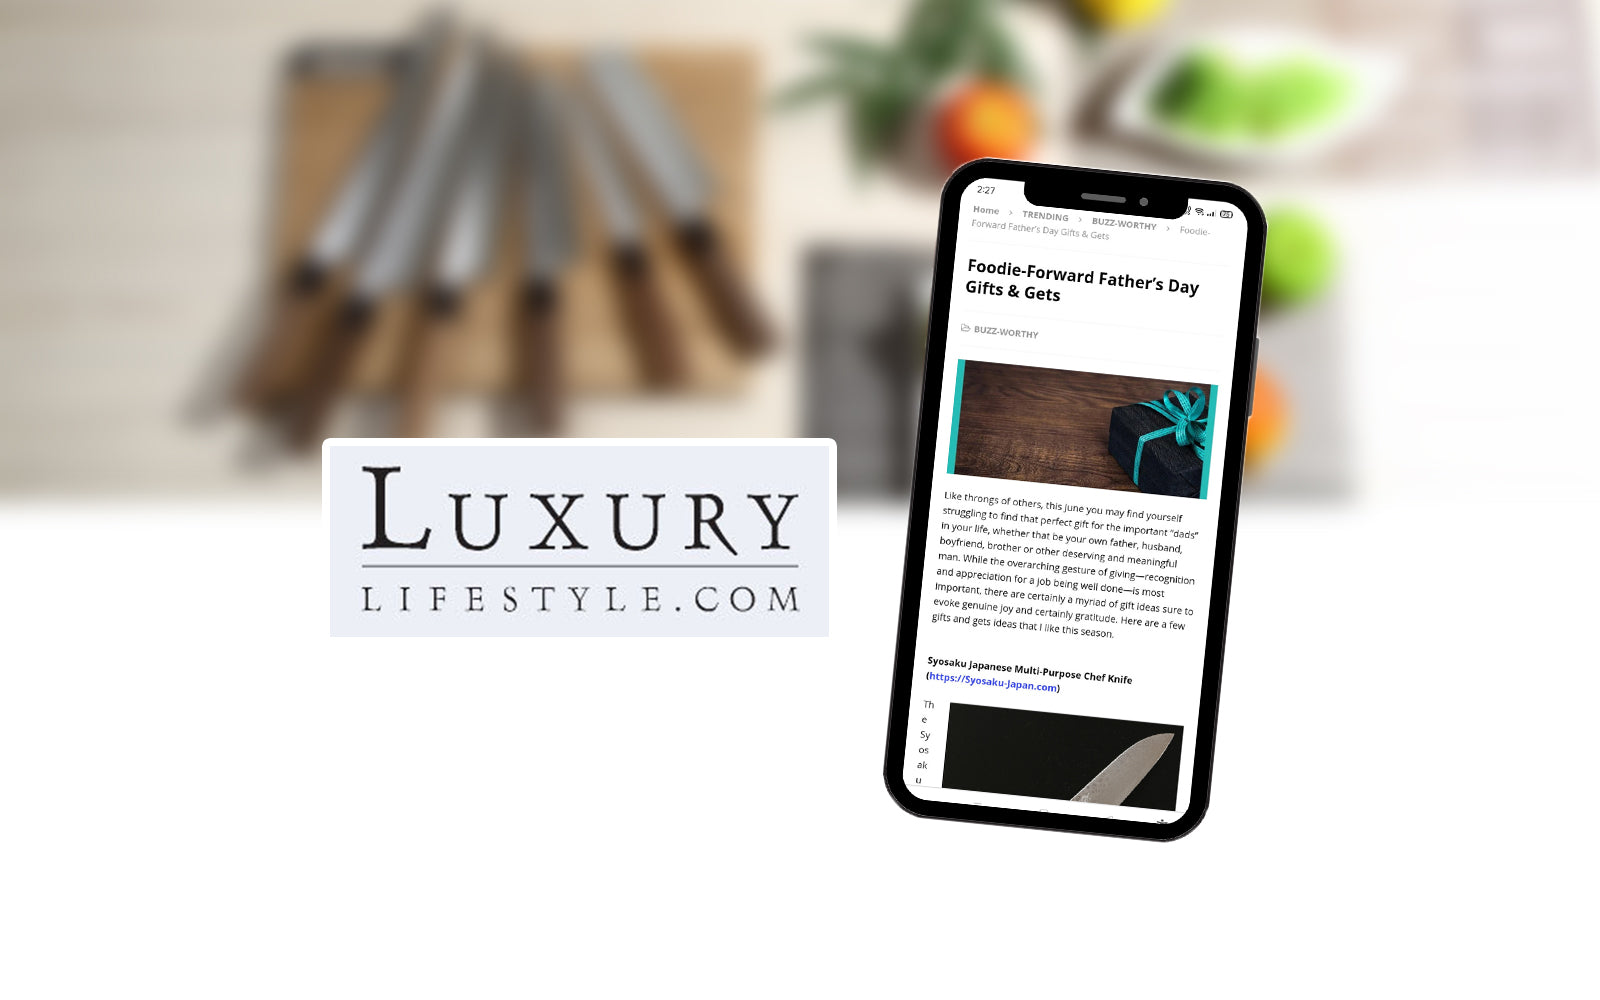 Syosaku-Japan was Featured in Luxury Lifestyle